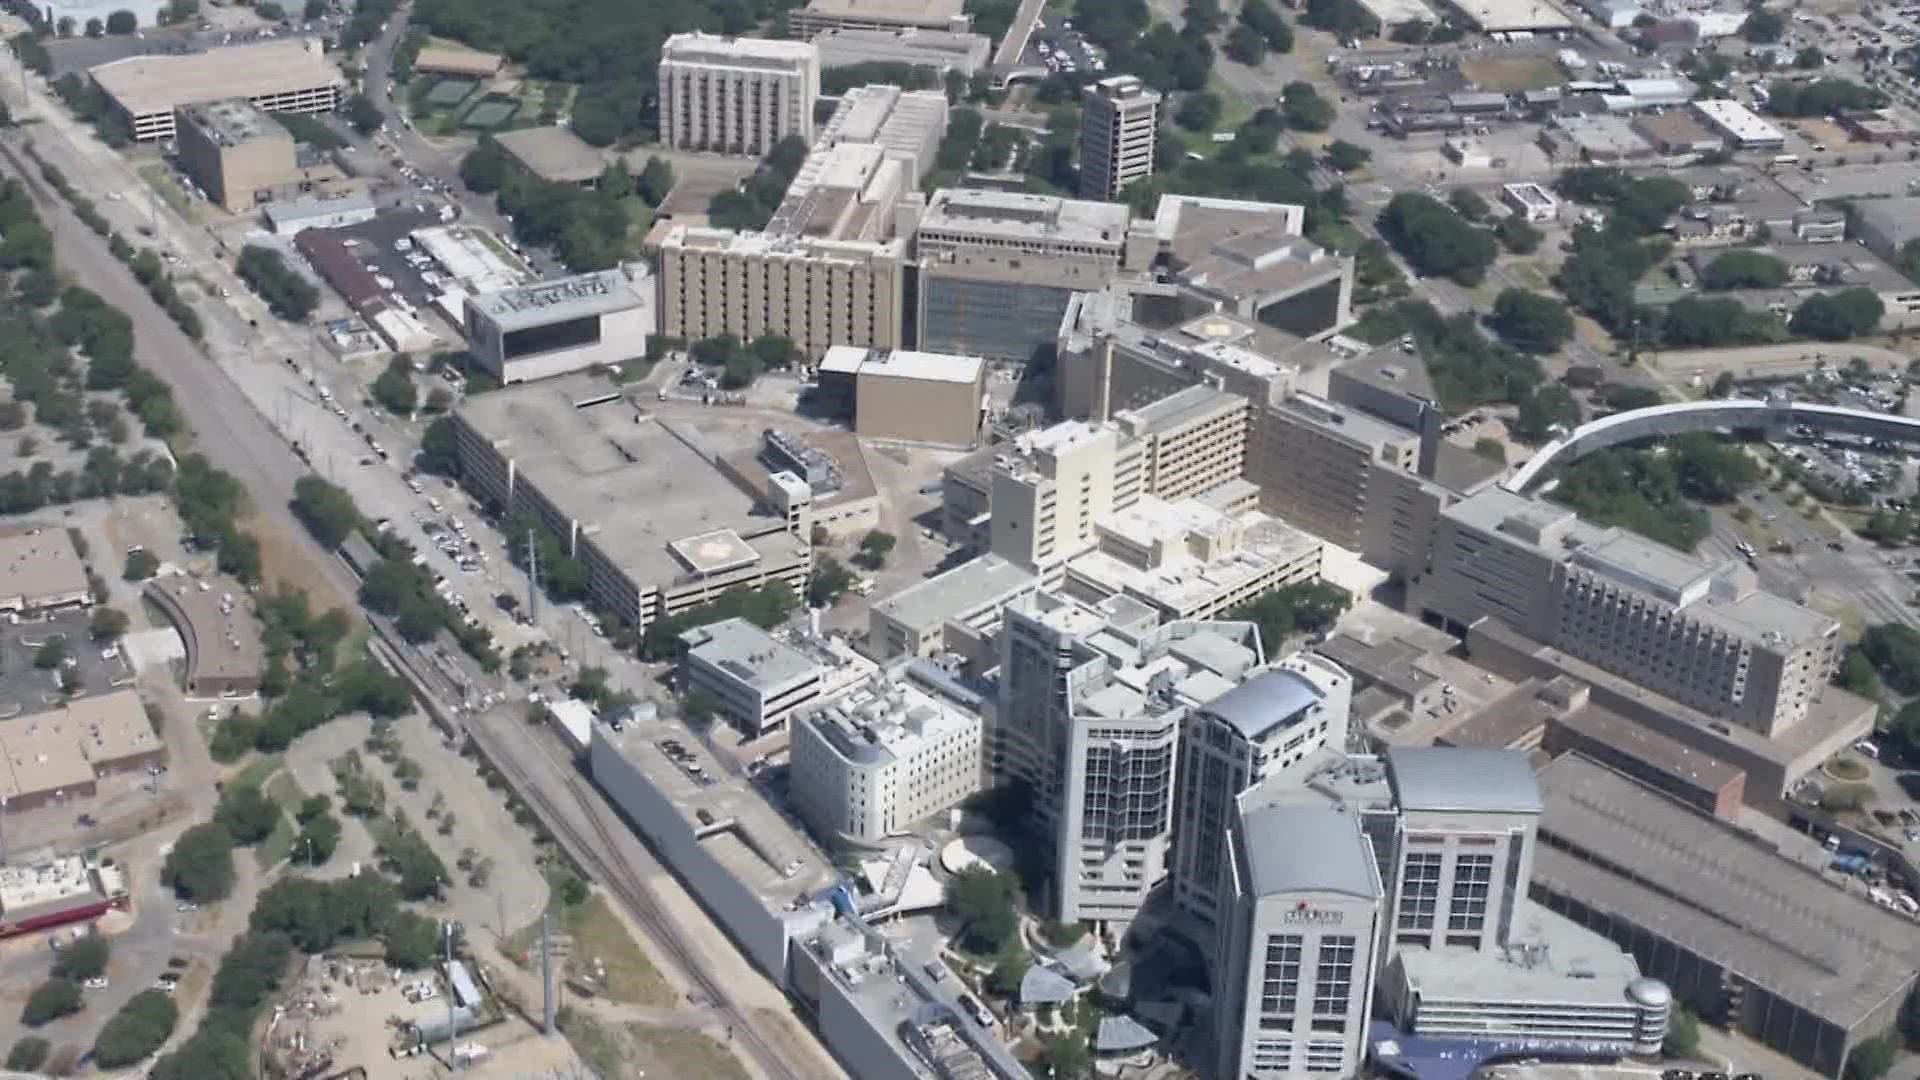 The City of Dallas is saying goodbye to the former Parkland Memorial Hospital, the place where President John F. Kennedy succumbed to his injuries.